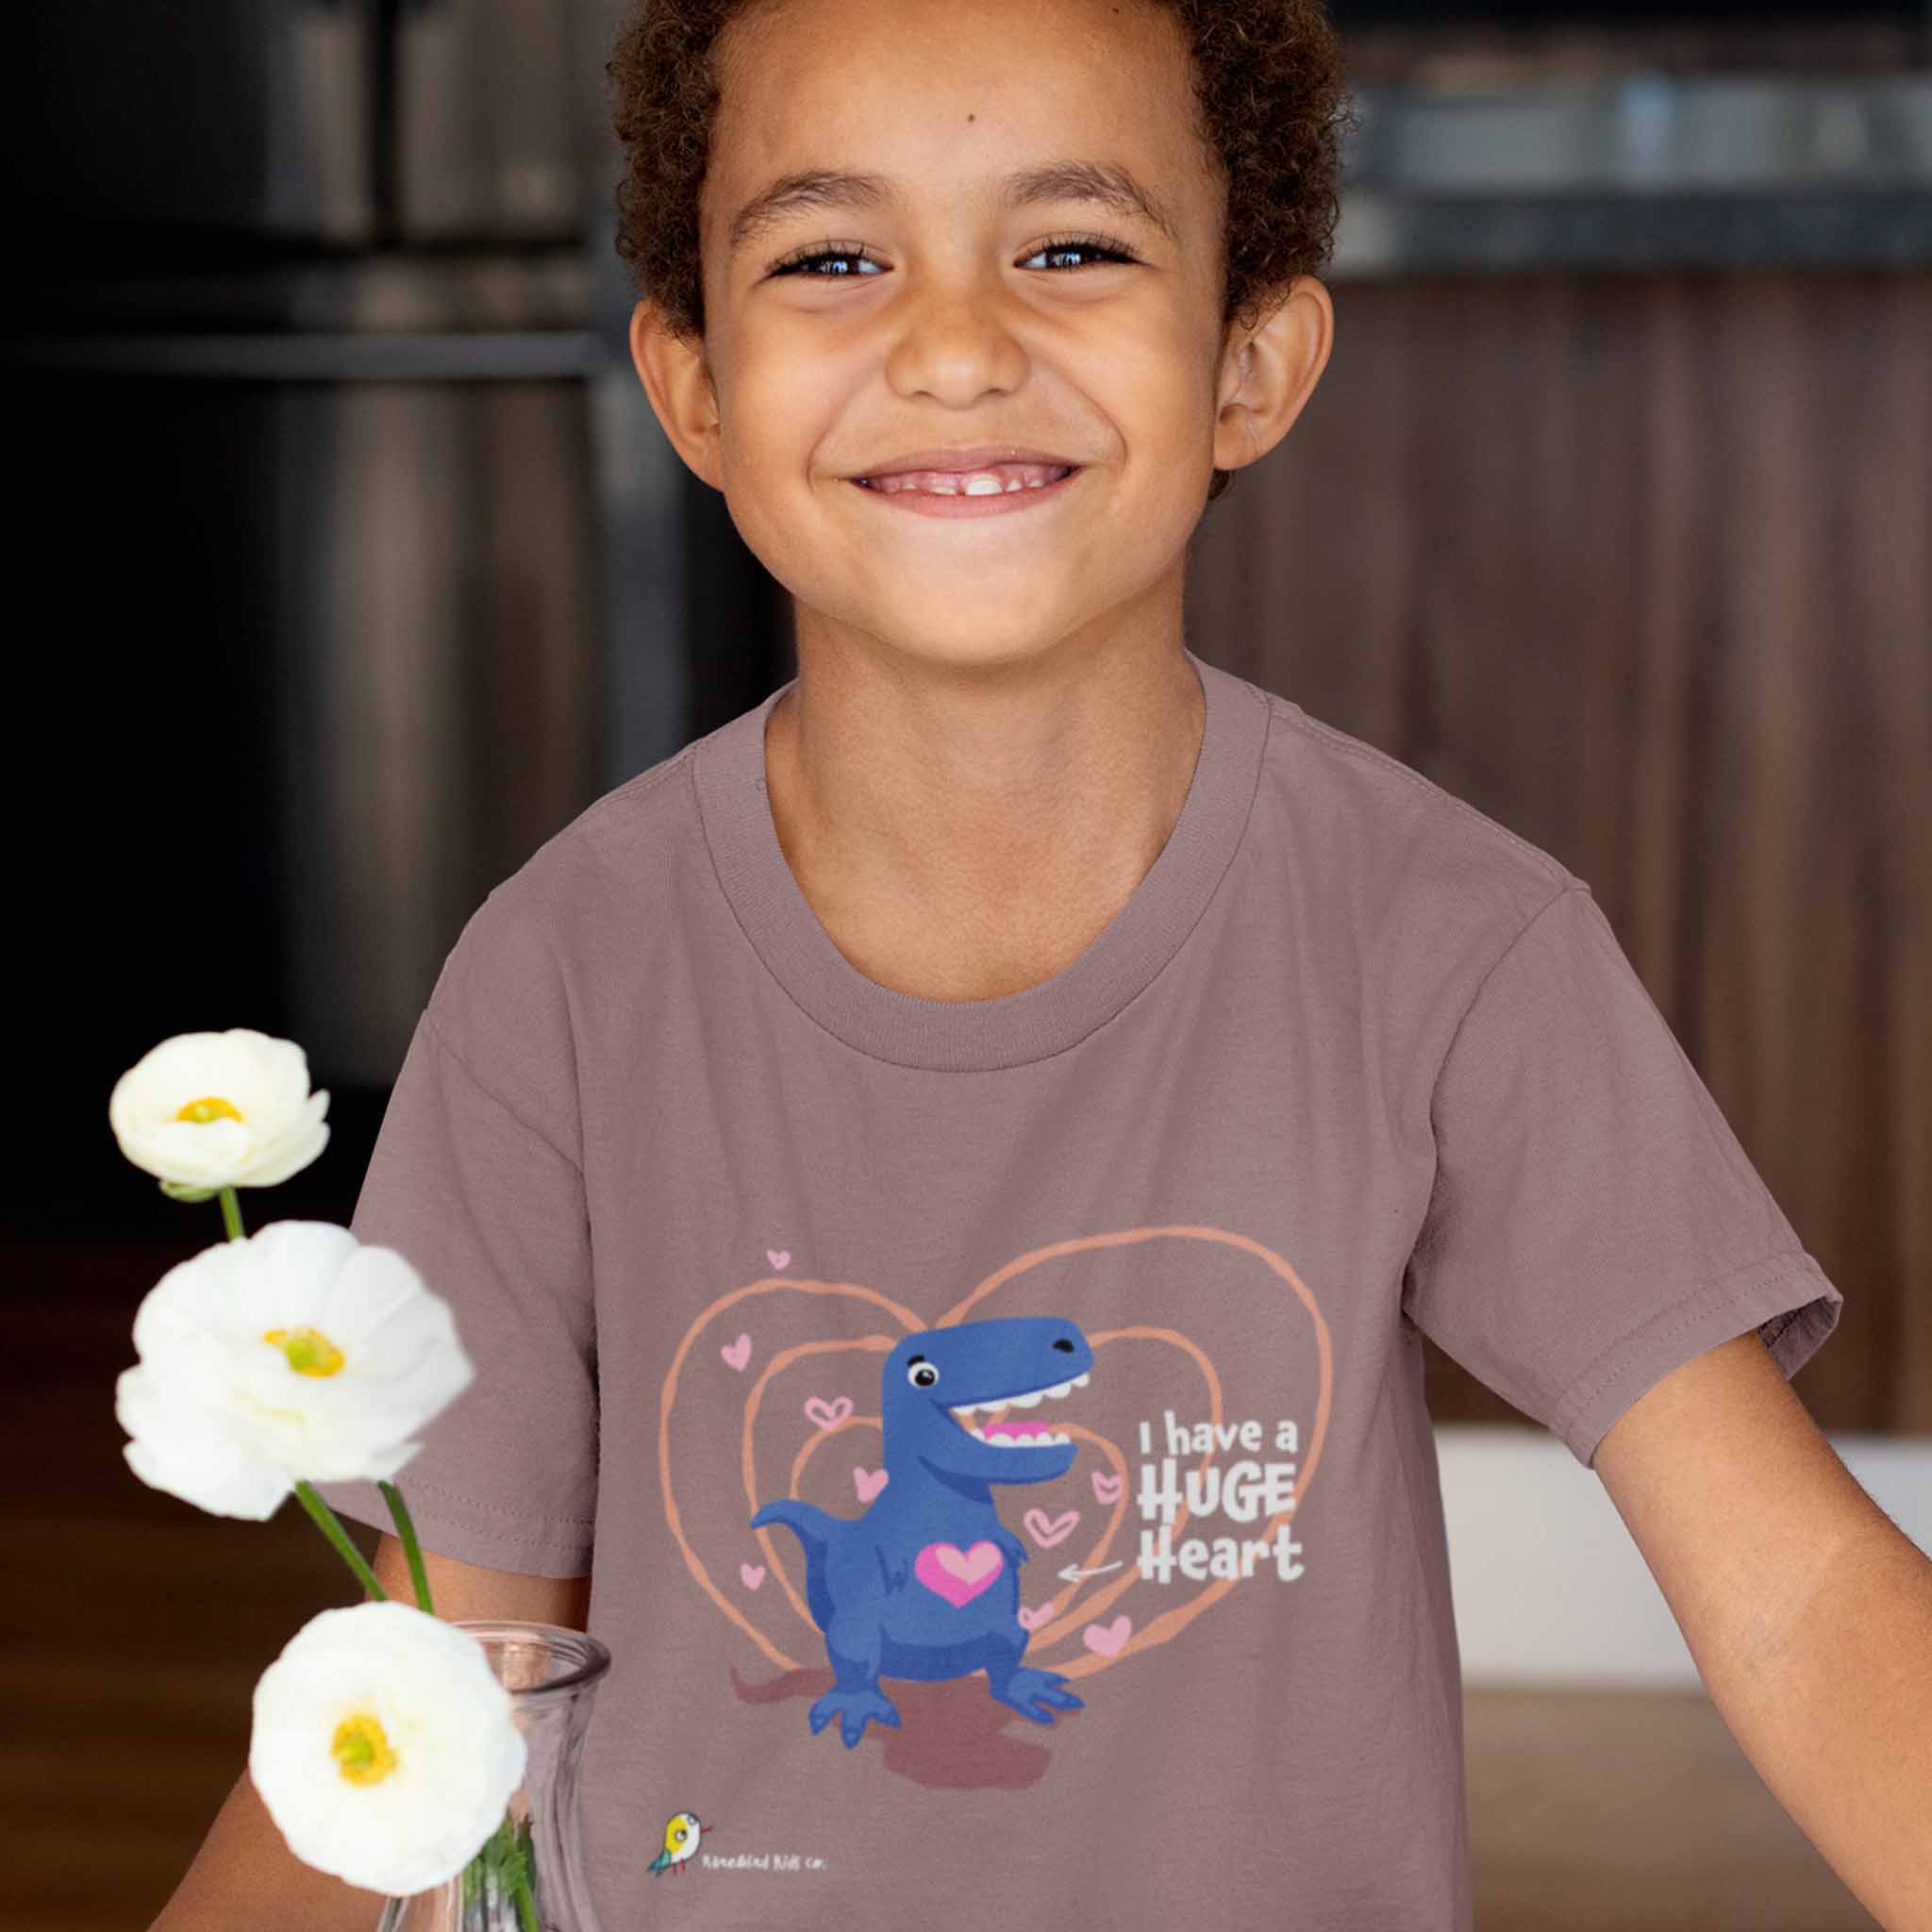 I Have a Huge Heart – t-shirt for healthy emotions - youth sizes